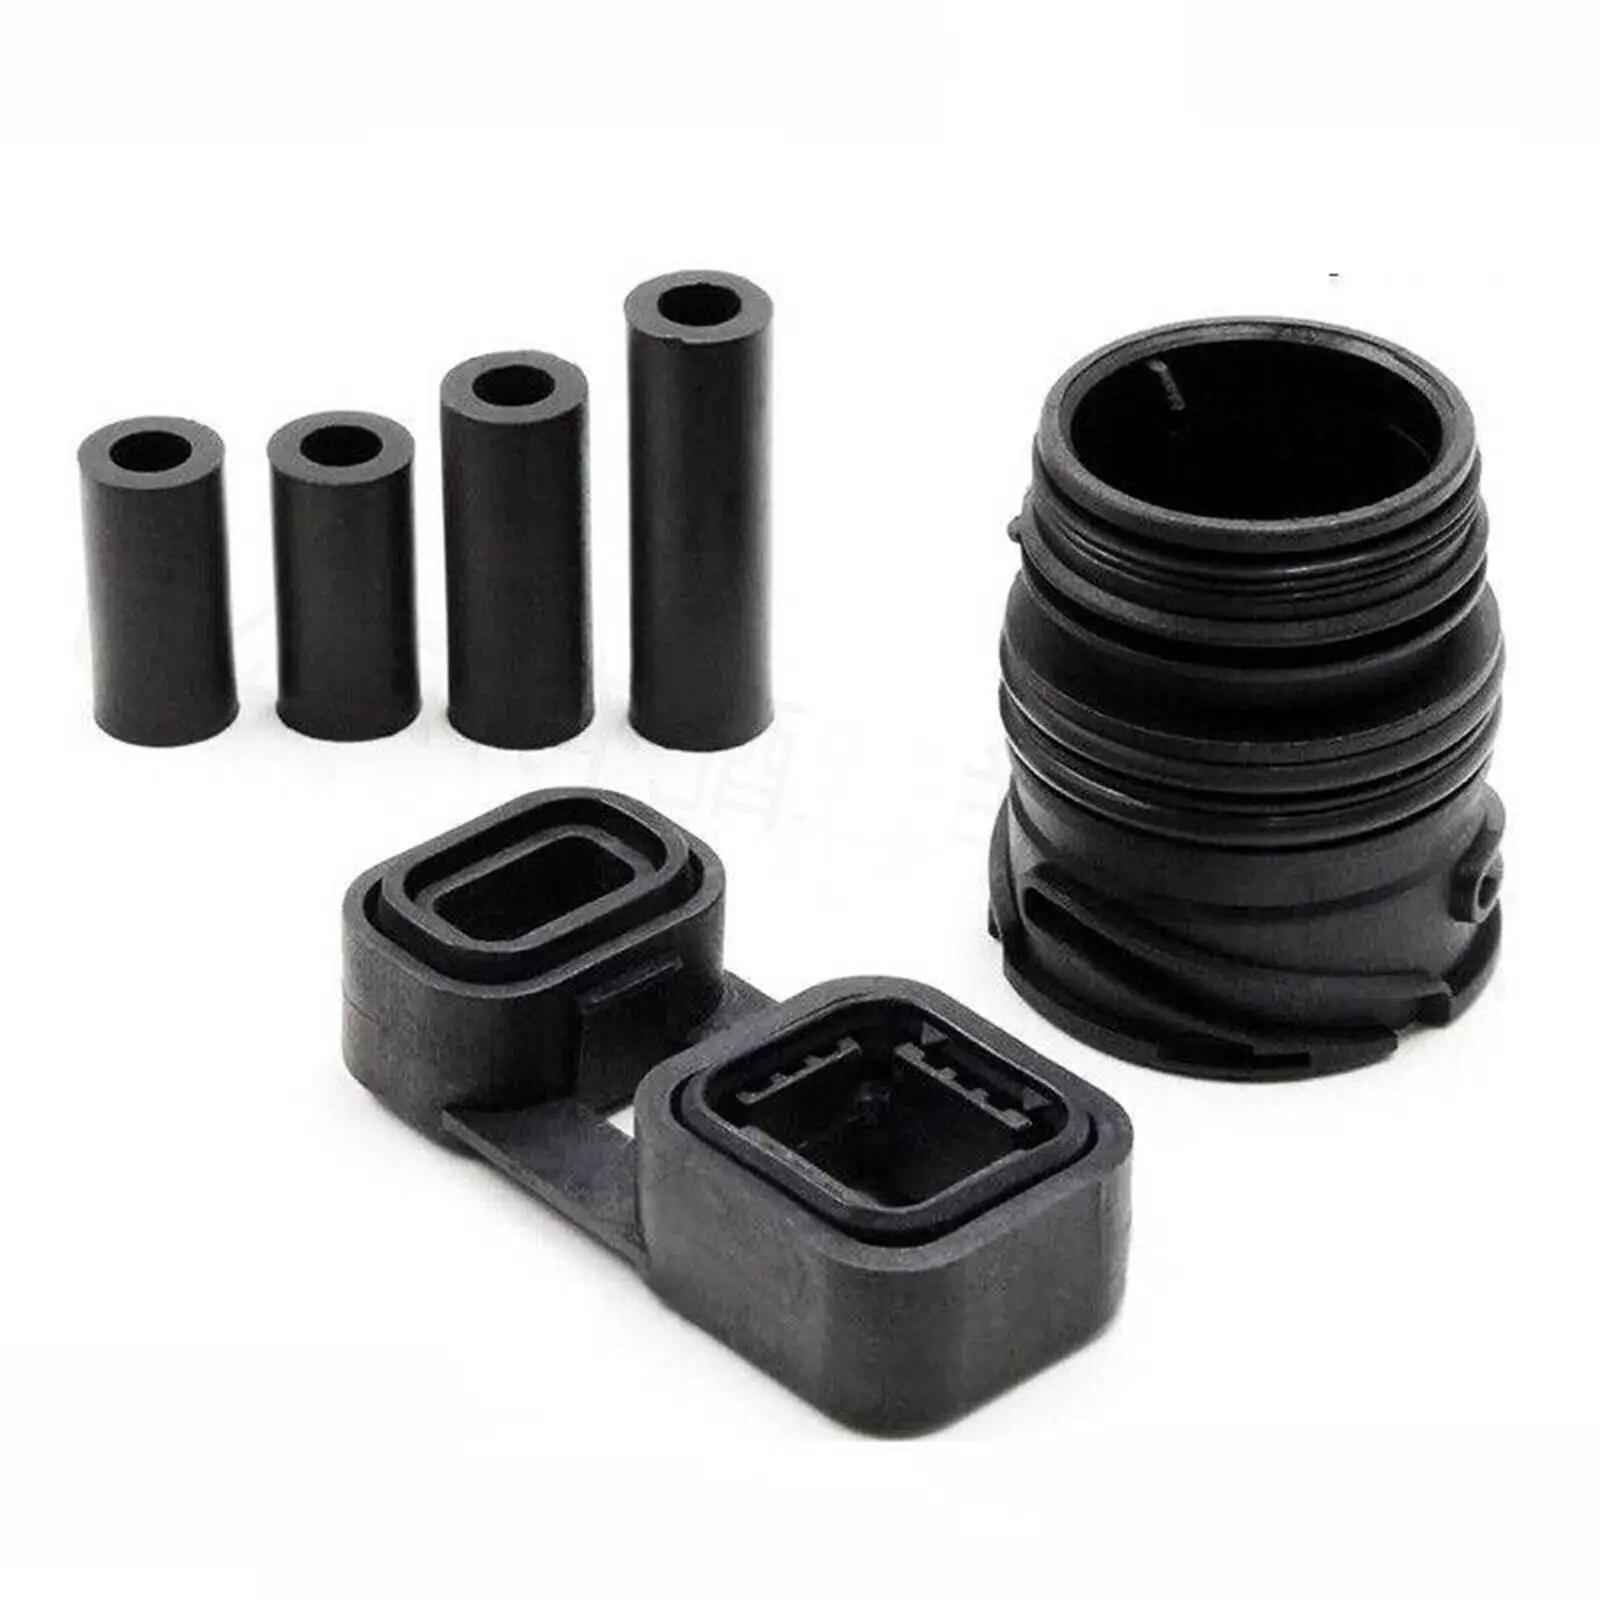 Valve Body Sleeve Connector Seal Kit Rubber for BMW 1 Series 3 Series 6HP32 x1, x3, x5, Z4, Zf Models with 6 Speed Zf 6HP26